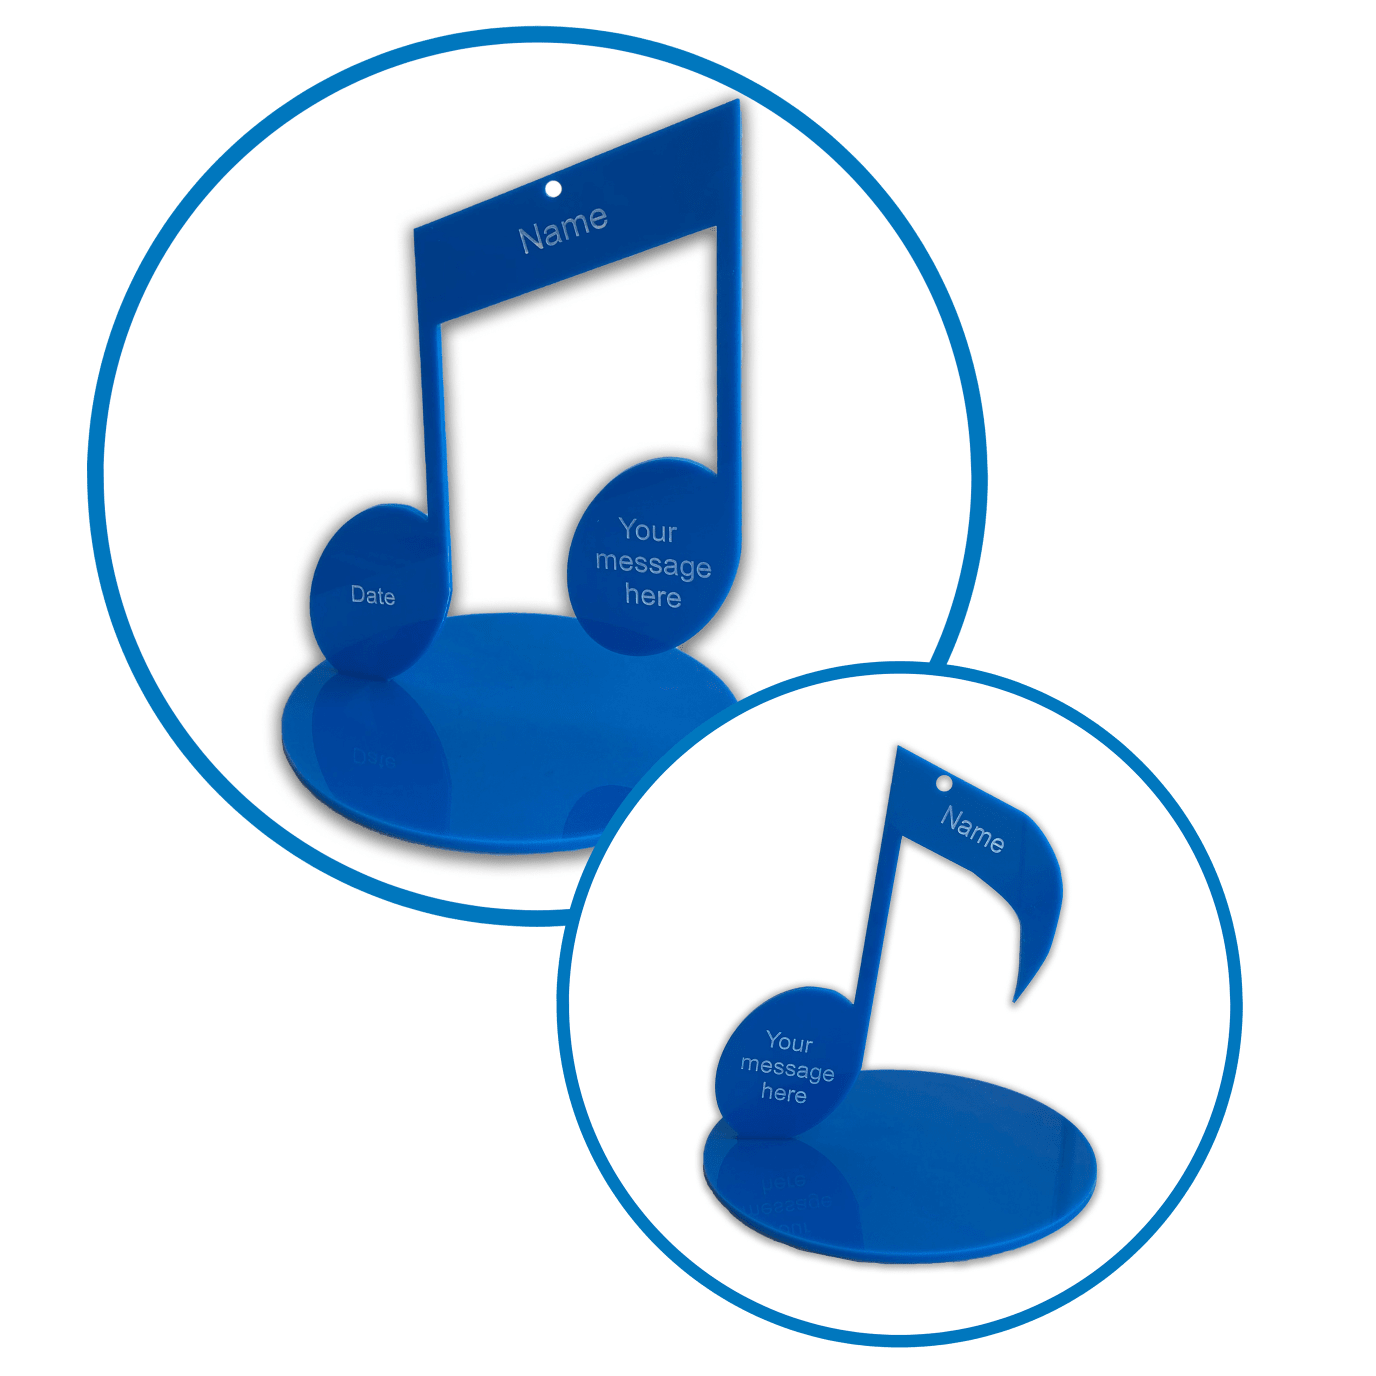 Musical Notes Single Note and Double Note Inside A Blue Circle